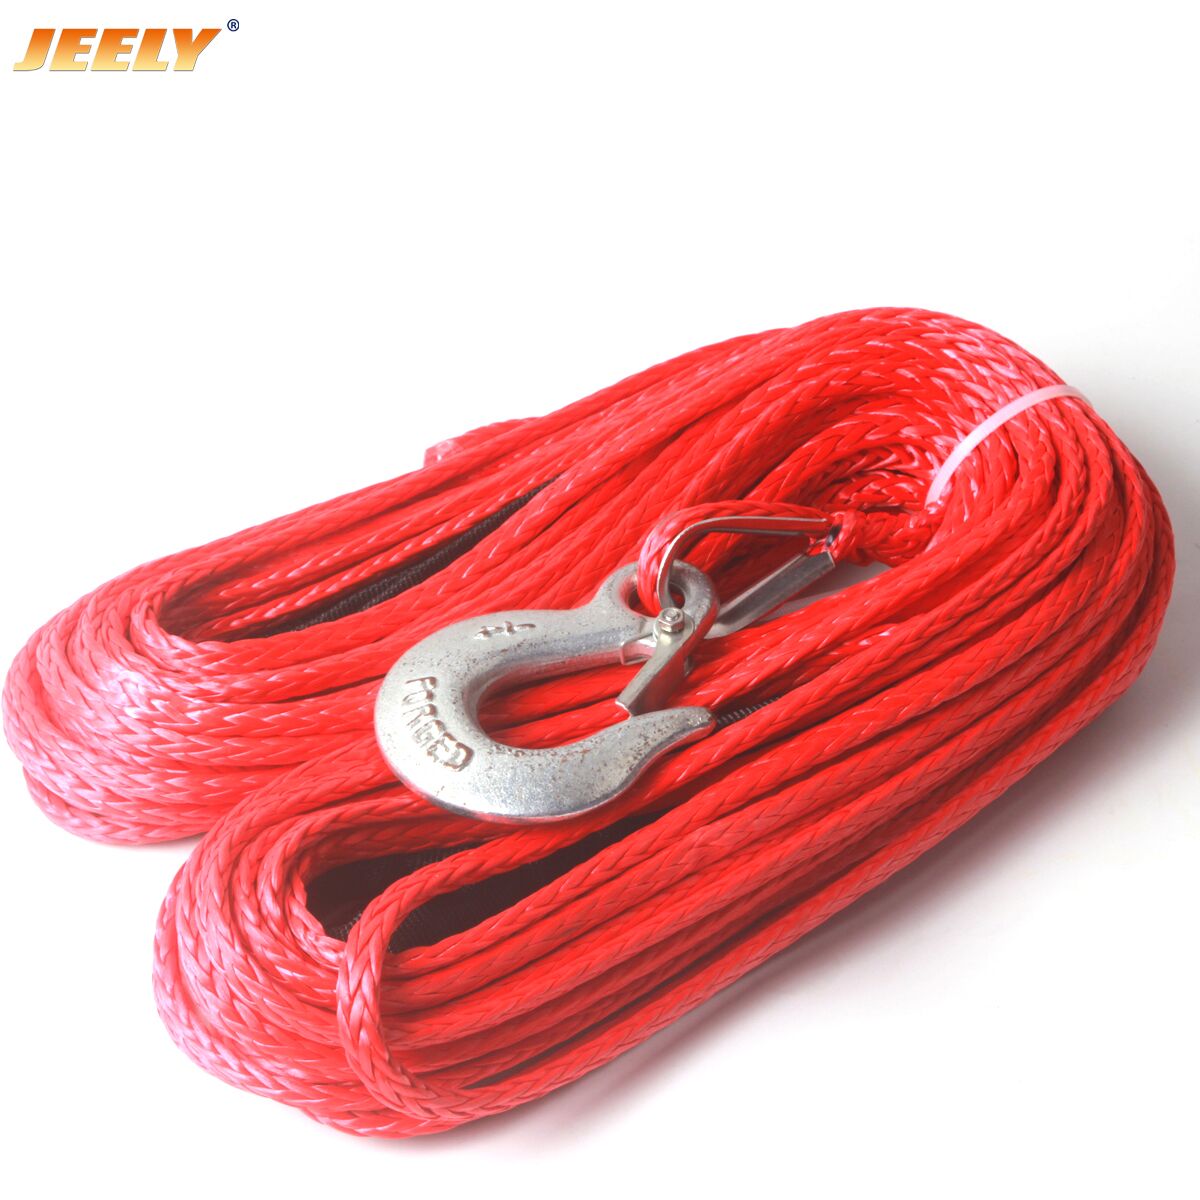 6mm 24m uhmwpe synthetic towing winch rope with hook, sleeve and thimble